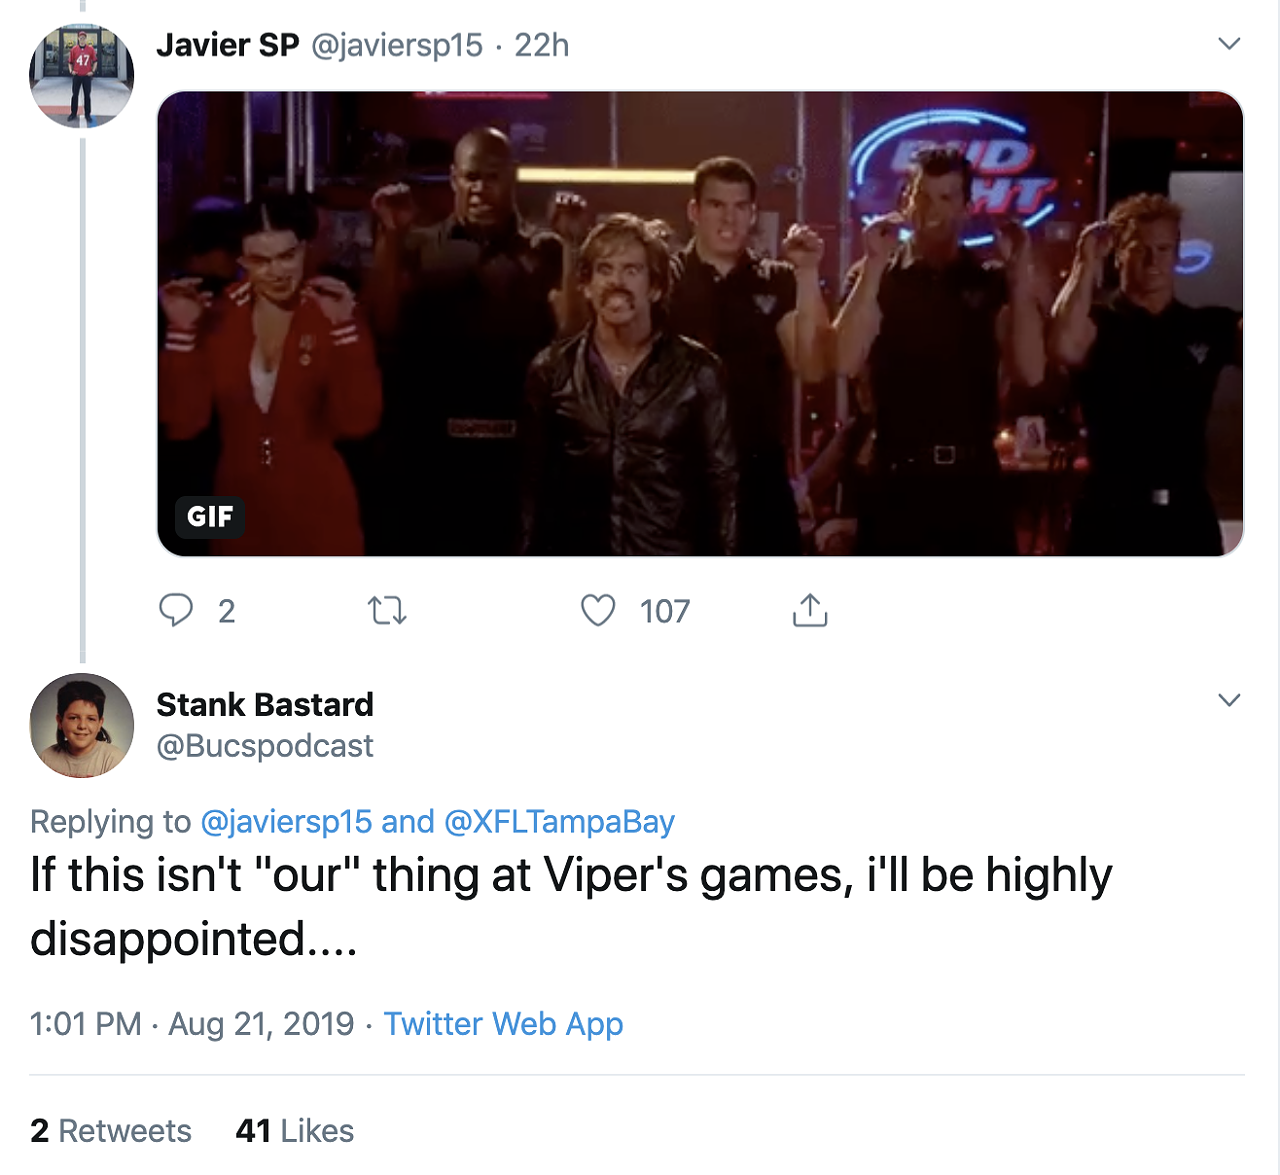 Twitter savagely roasts Tampa Bay's new 'Vipers' XFL team